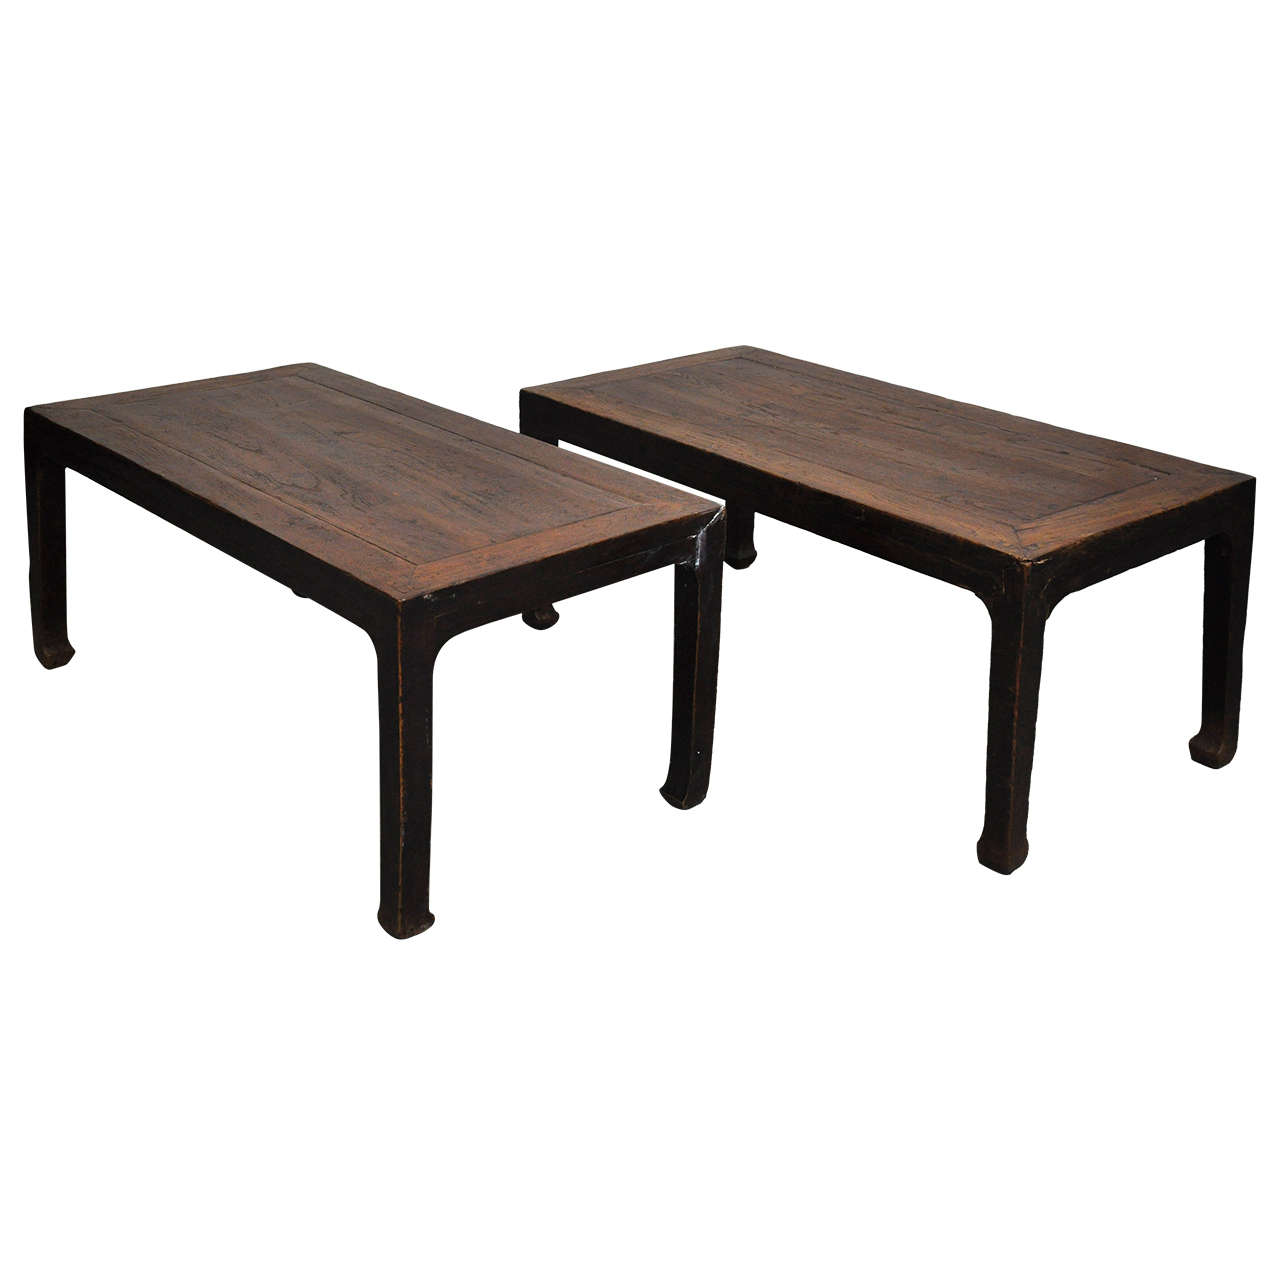 19th Century Pair of Chinese Coffee or Side Tables